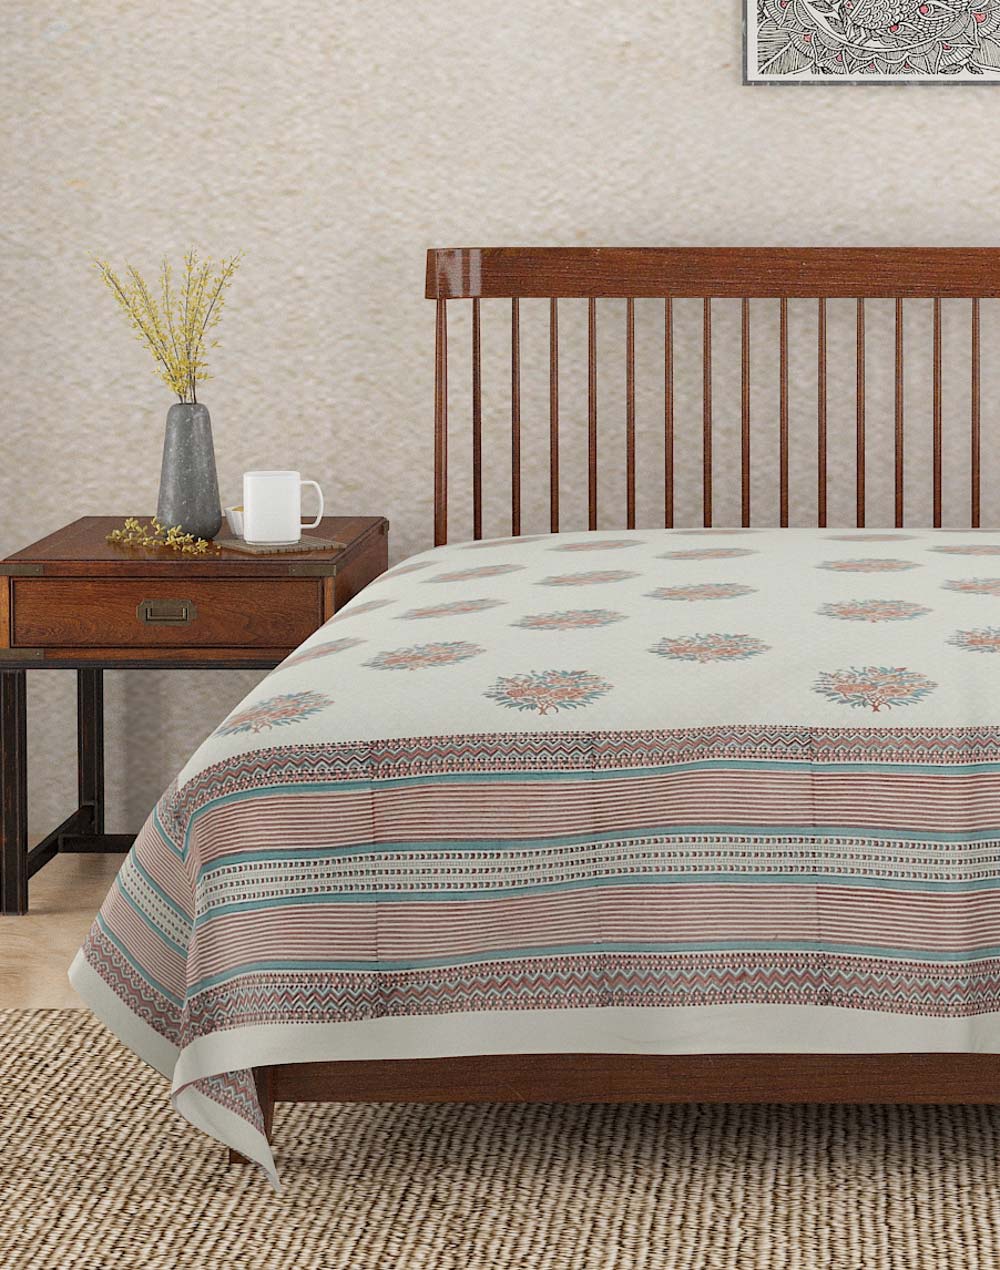 Cotton Palampur Printed Bed Cover - Queen